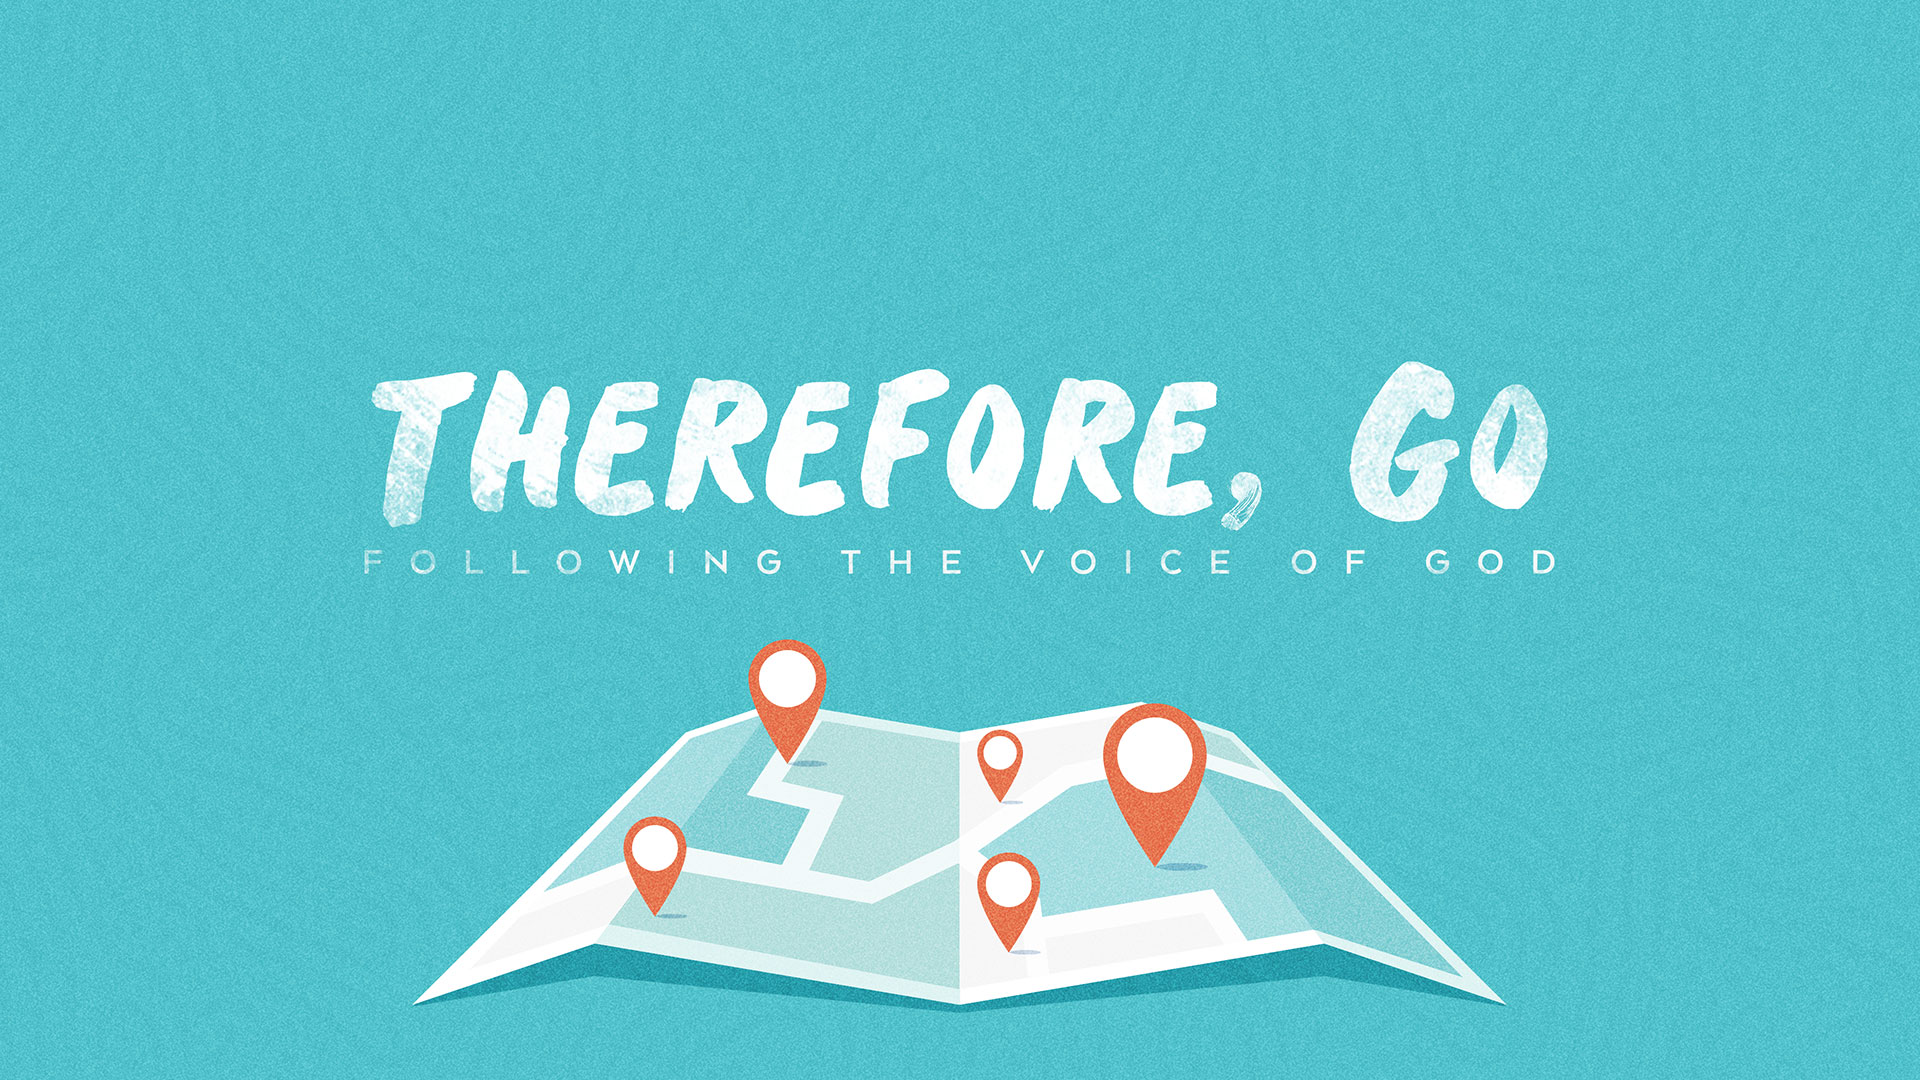 "Therefore, Go: Following The Voice Of God" Message Series